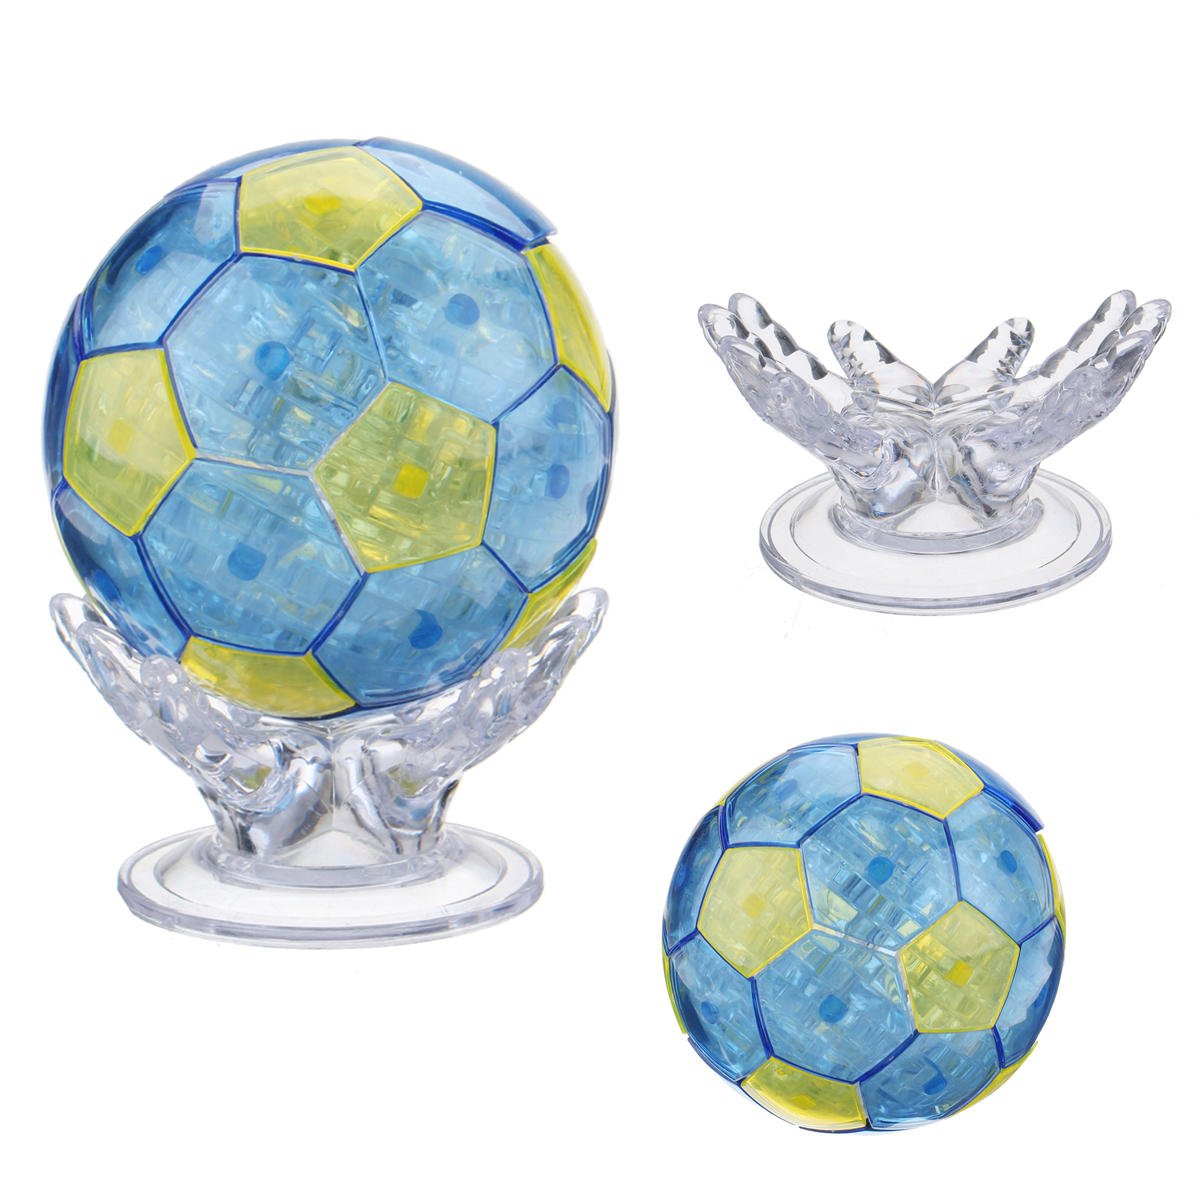 Crystal 3D Football puzzle with 76 numbered jigsaw pieces brain teaser Xmas Gift 